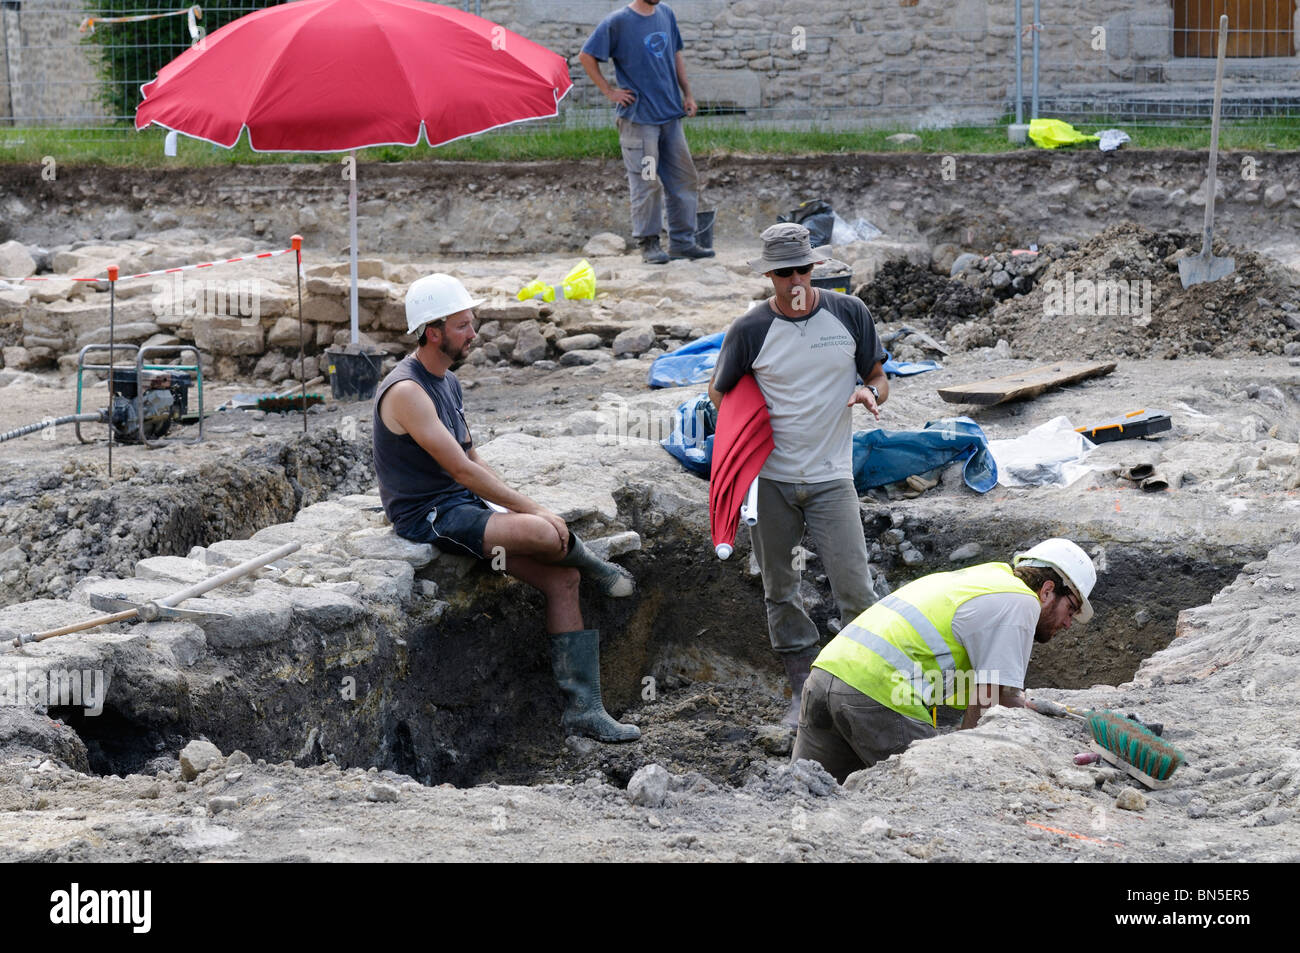 Archeology dig at Mortemart in France. Stock Photo